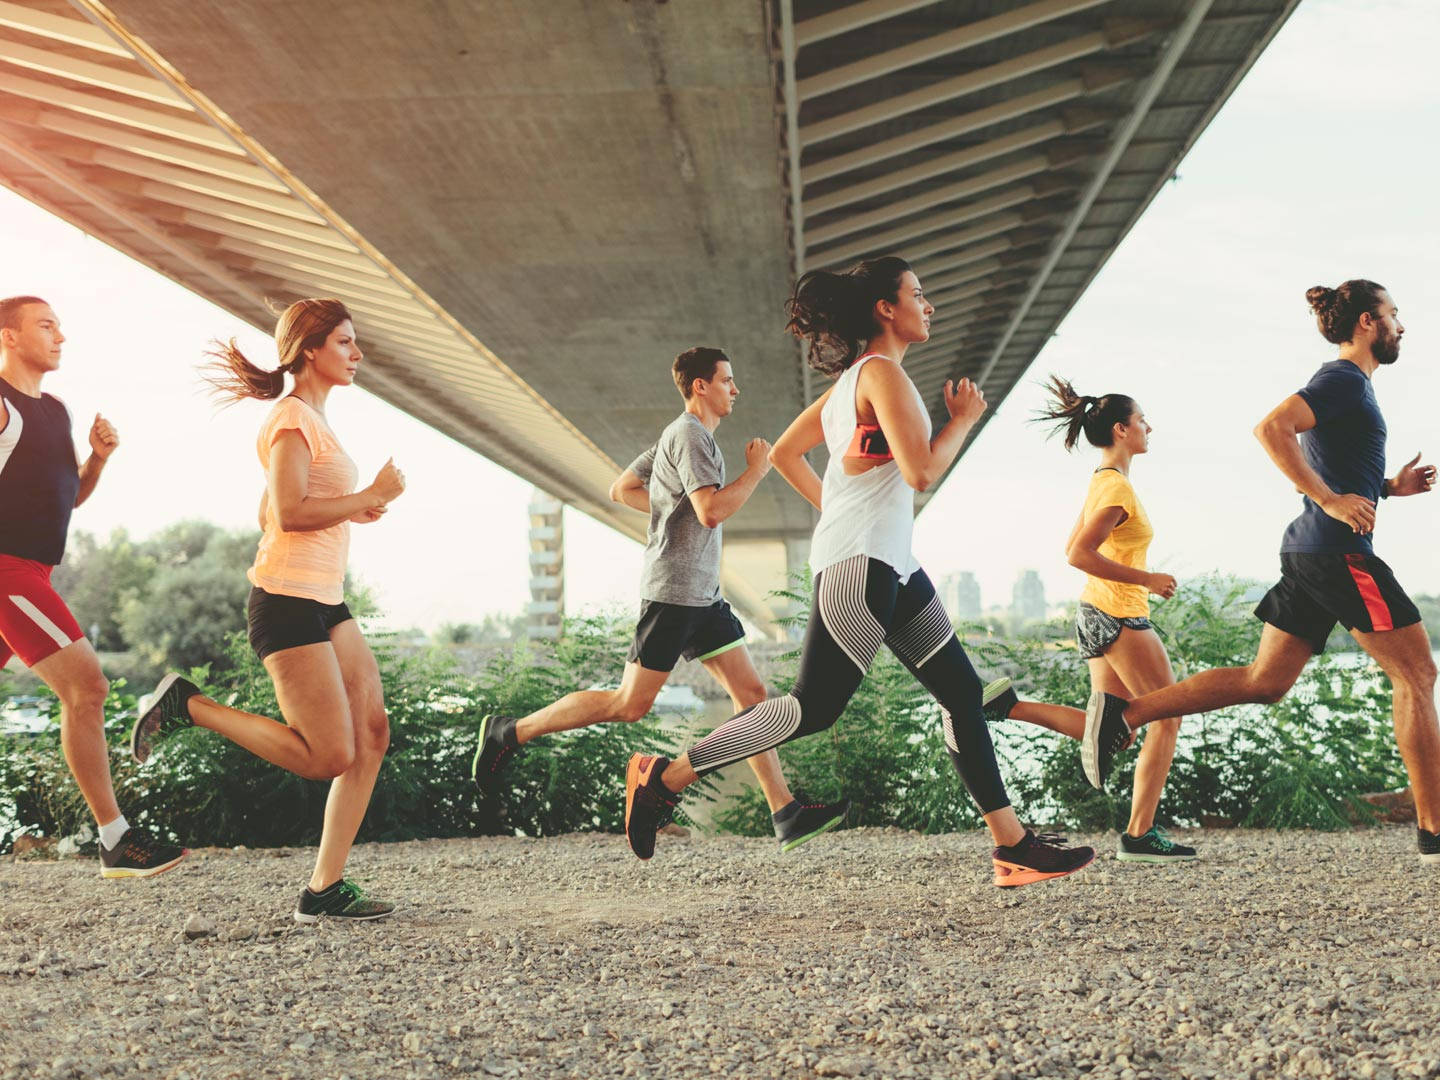 Jogging Exercise With Peers Wallpaper